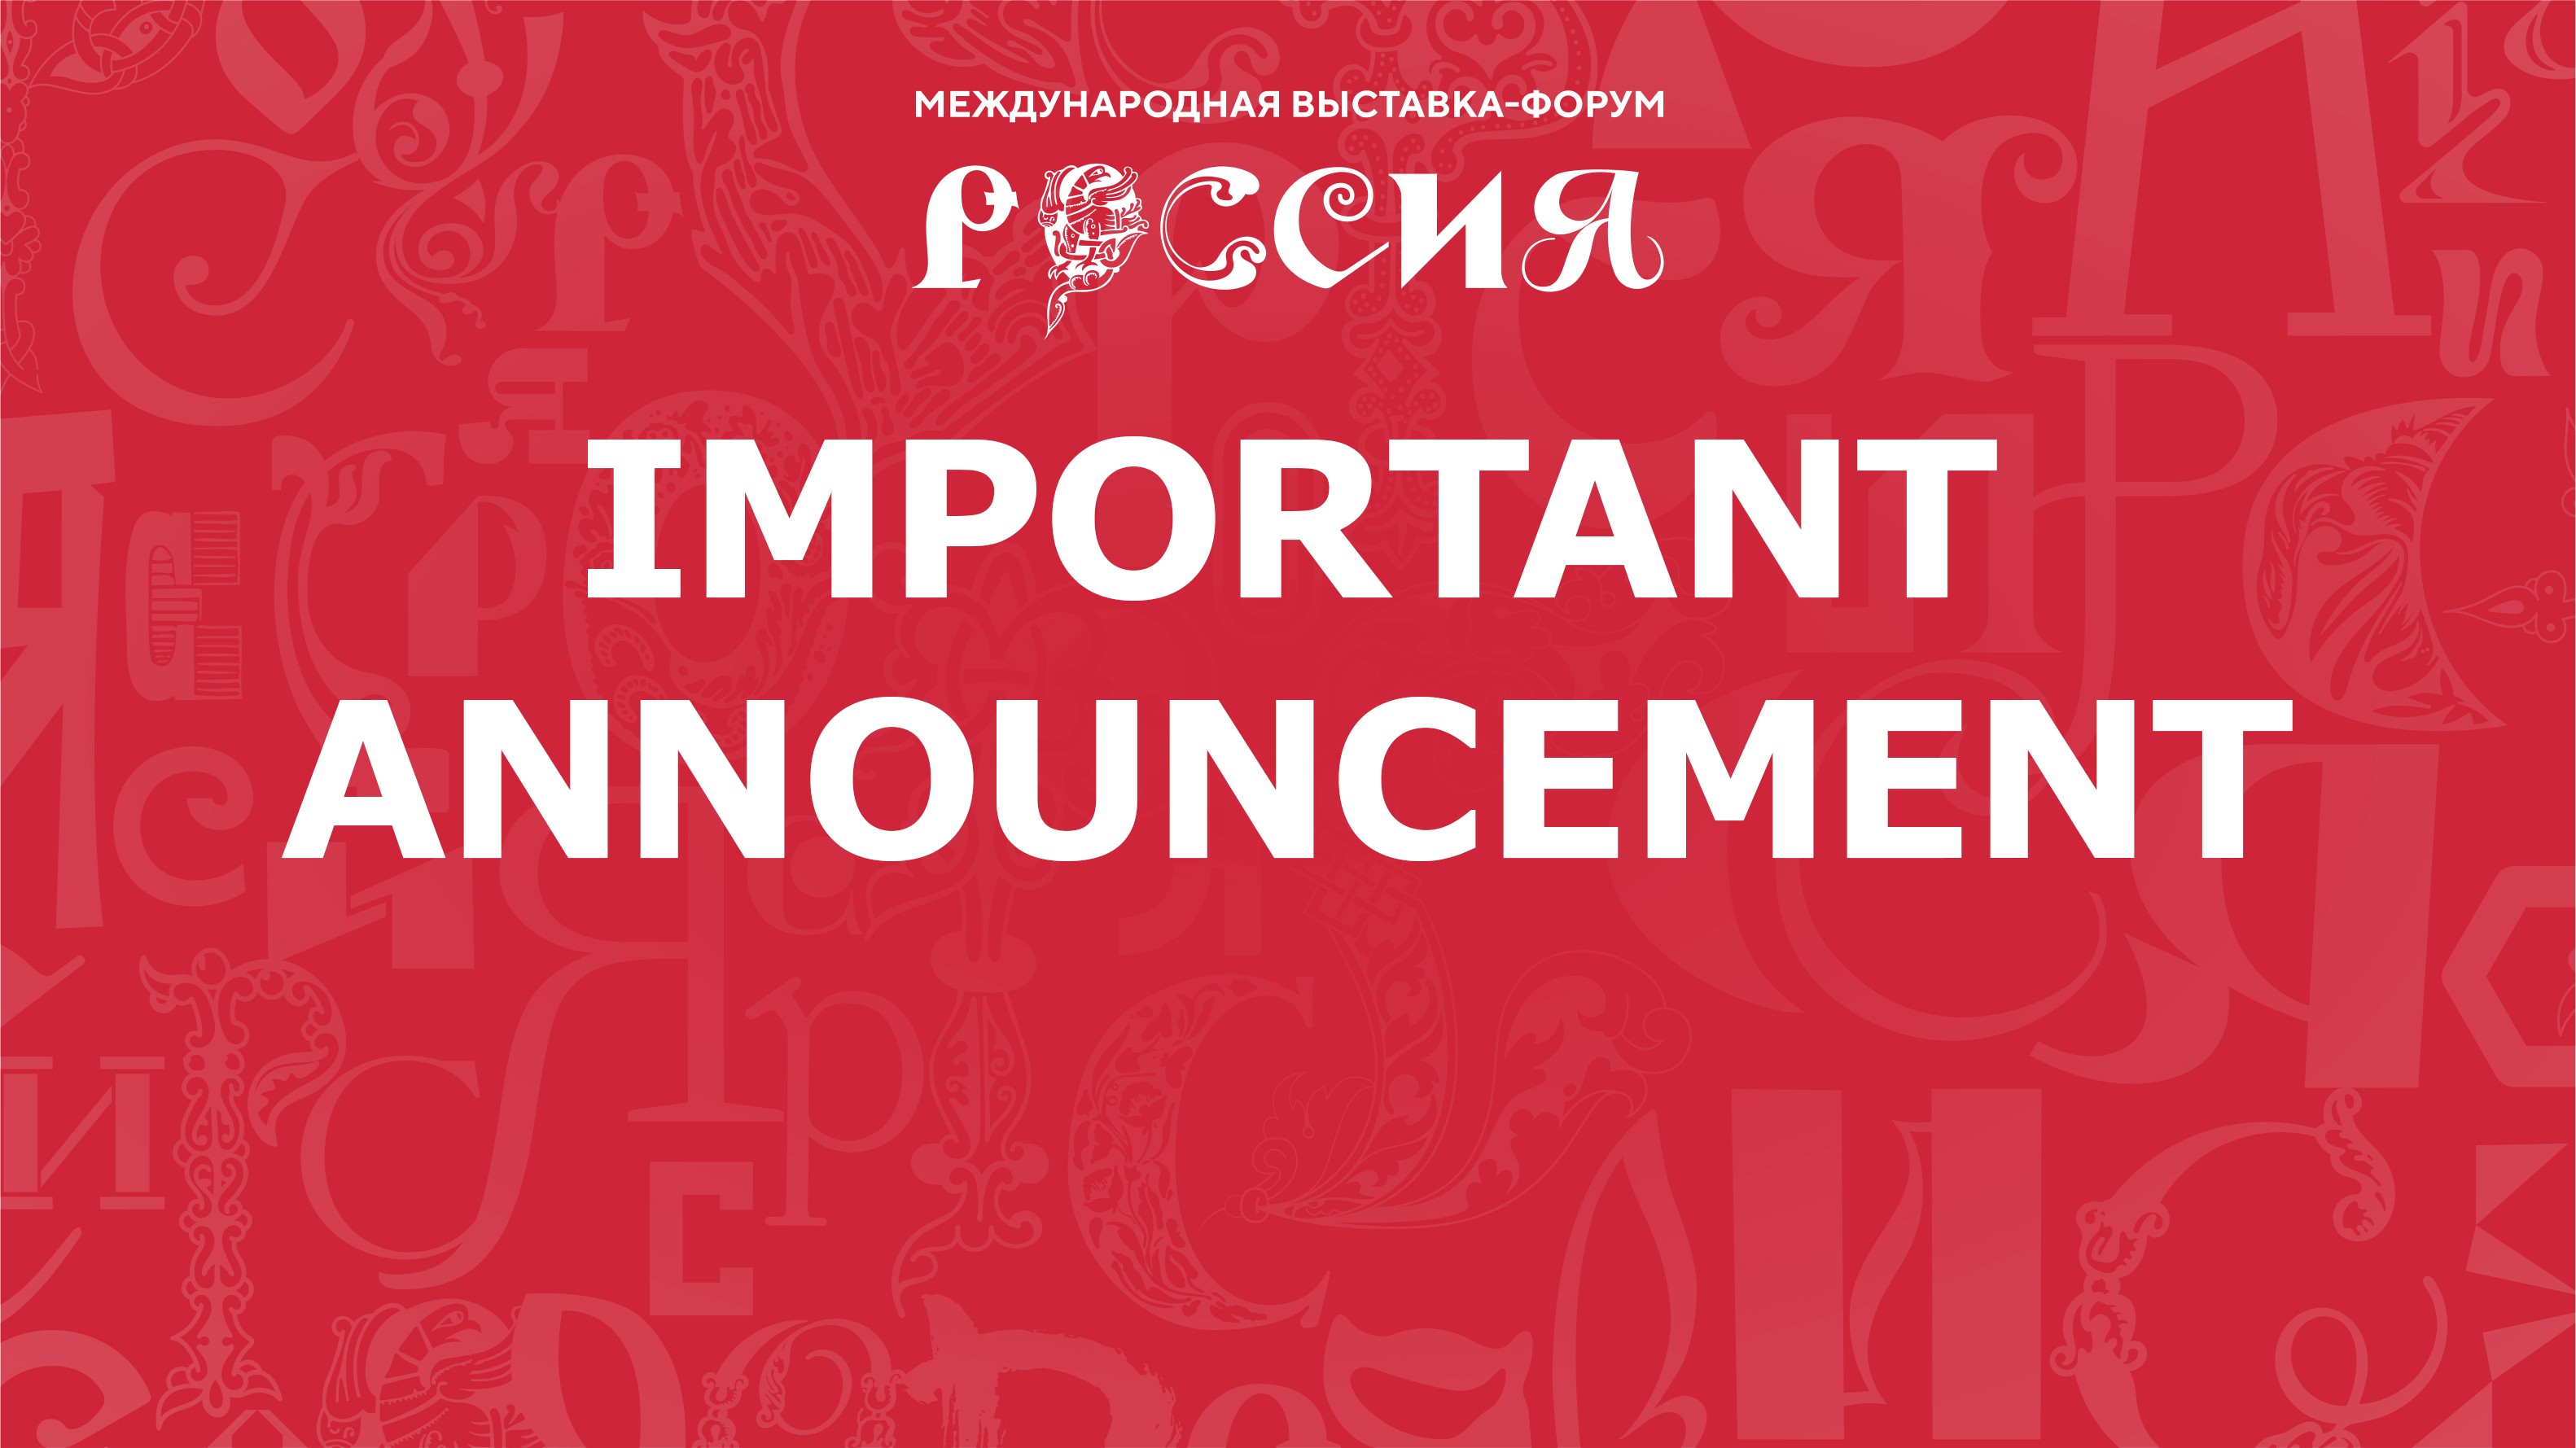 On March 18, the Atom and Lukoil pavilions are not available for visiting